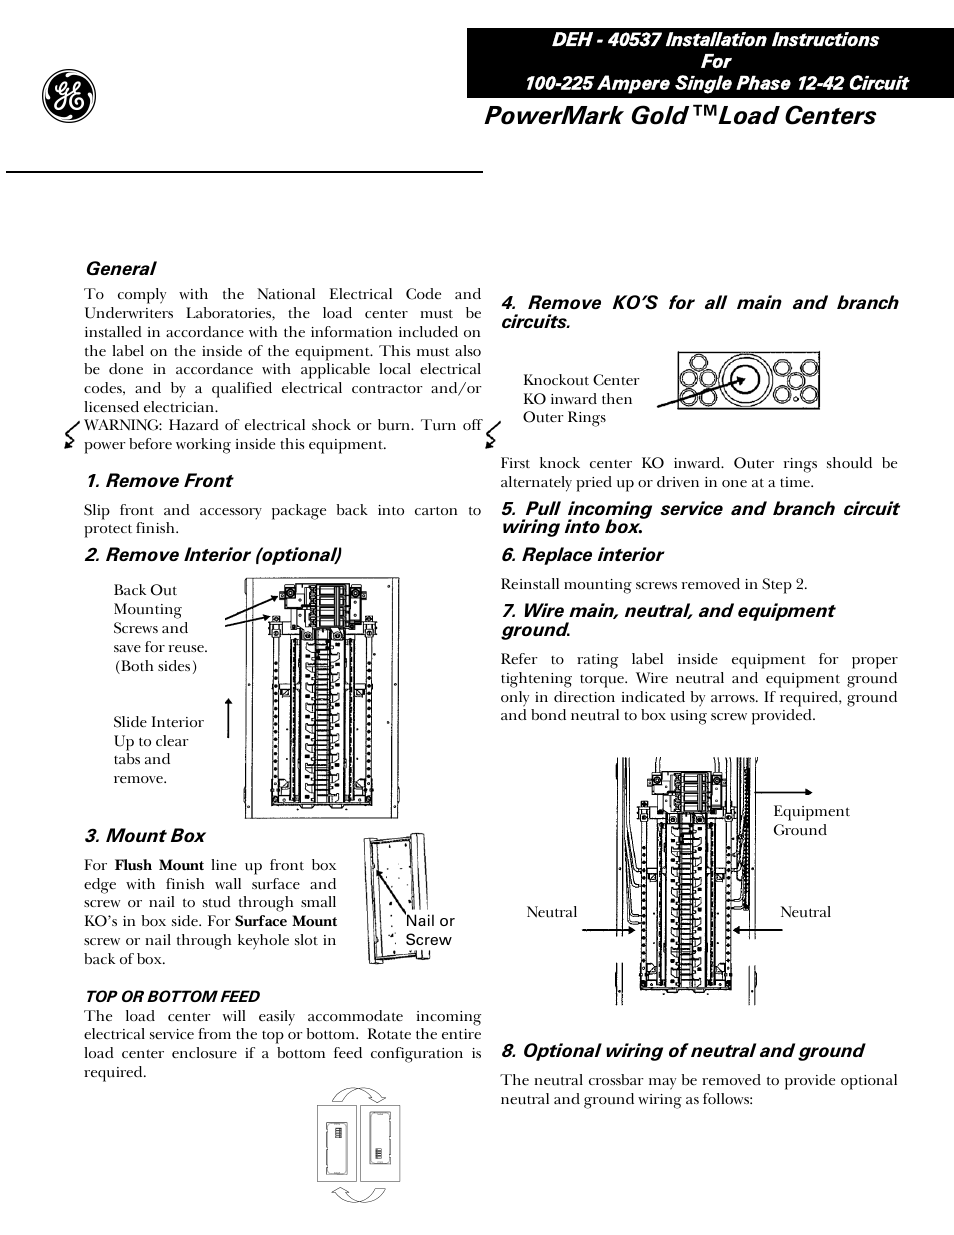 GE Industrial Solutions Power Mark Gold Load Centers User Manual | 4 pages